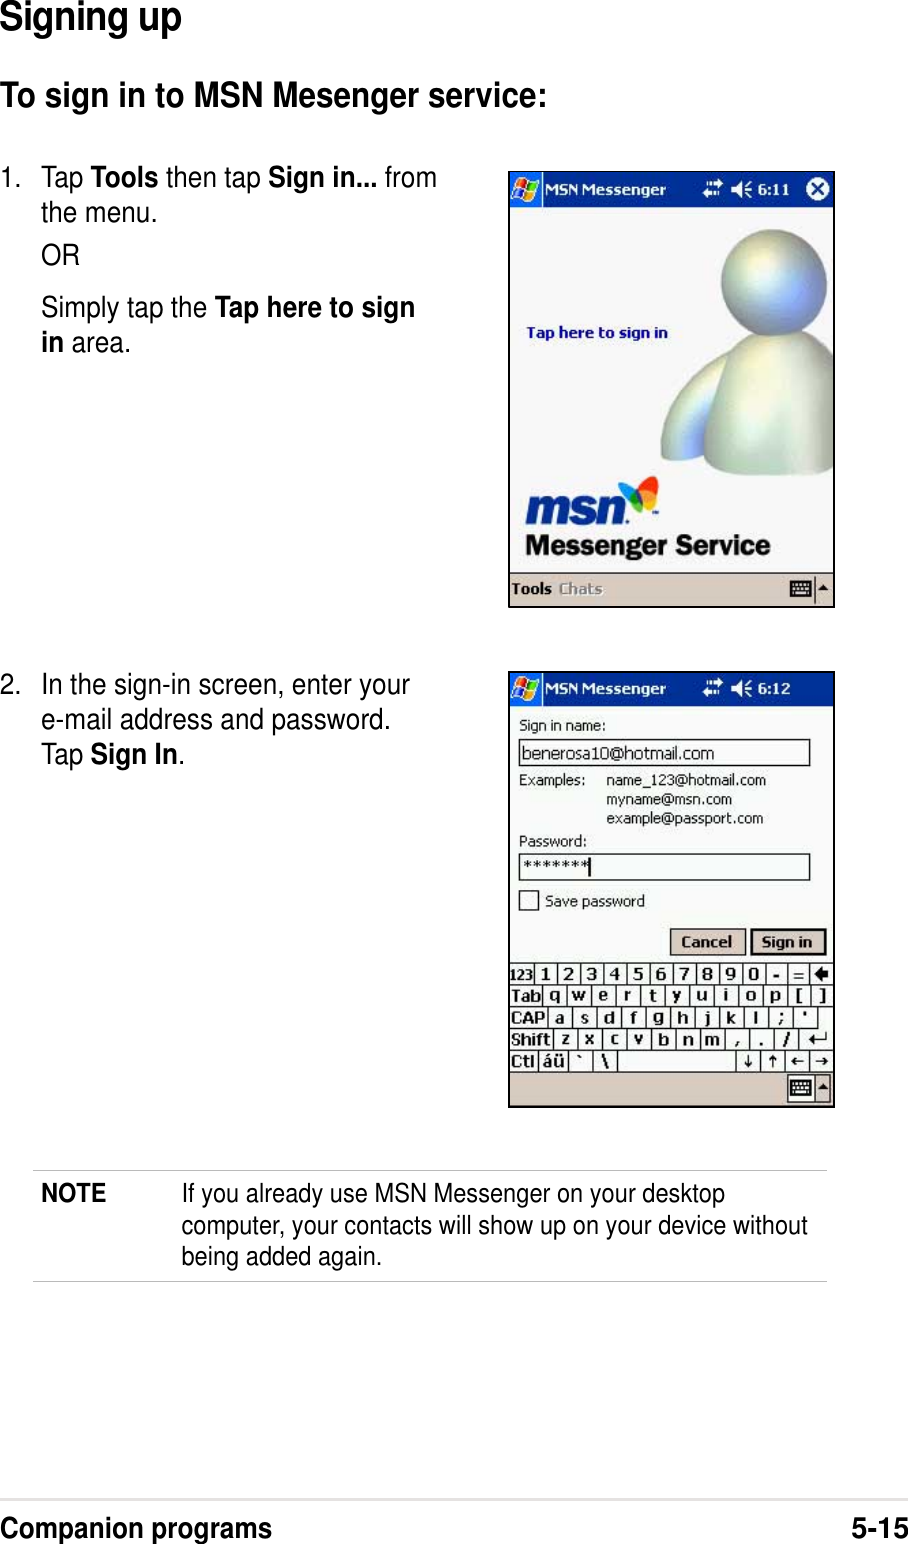 Companion programs5-15Signing upTo sign in to MSN Mesenger service:NOTE If you already use MSN Messenger on your desktopcomputer, your contacts will show up on your device withoutbeing added again.1. Tap Tools then tap Sign in... fromthe menu.ORSimply tap the Tap here to signin area.2. In the sign-in screen, enter youre-mail address and password.Tap Sign In.